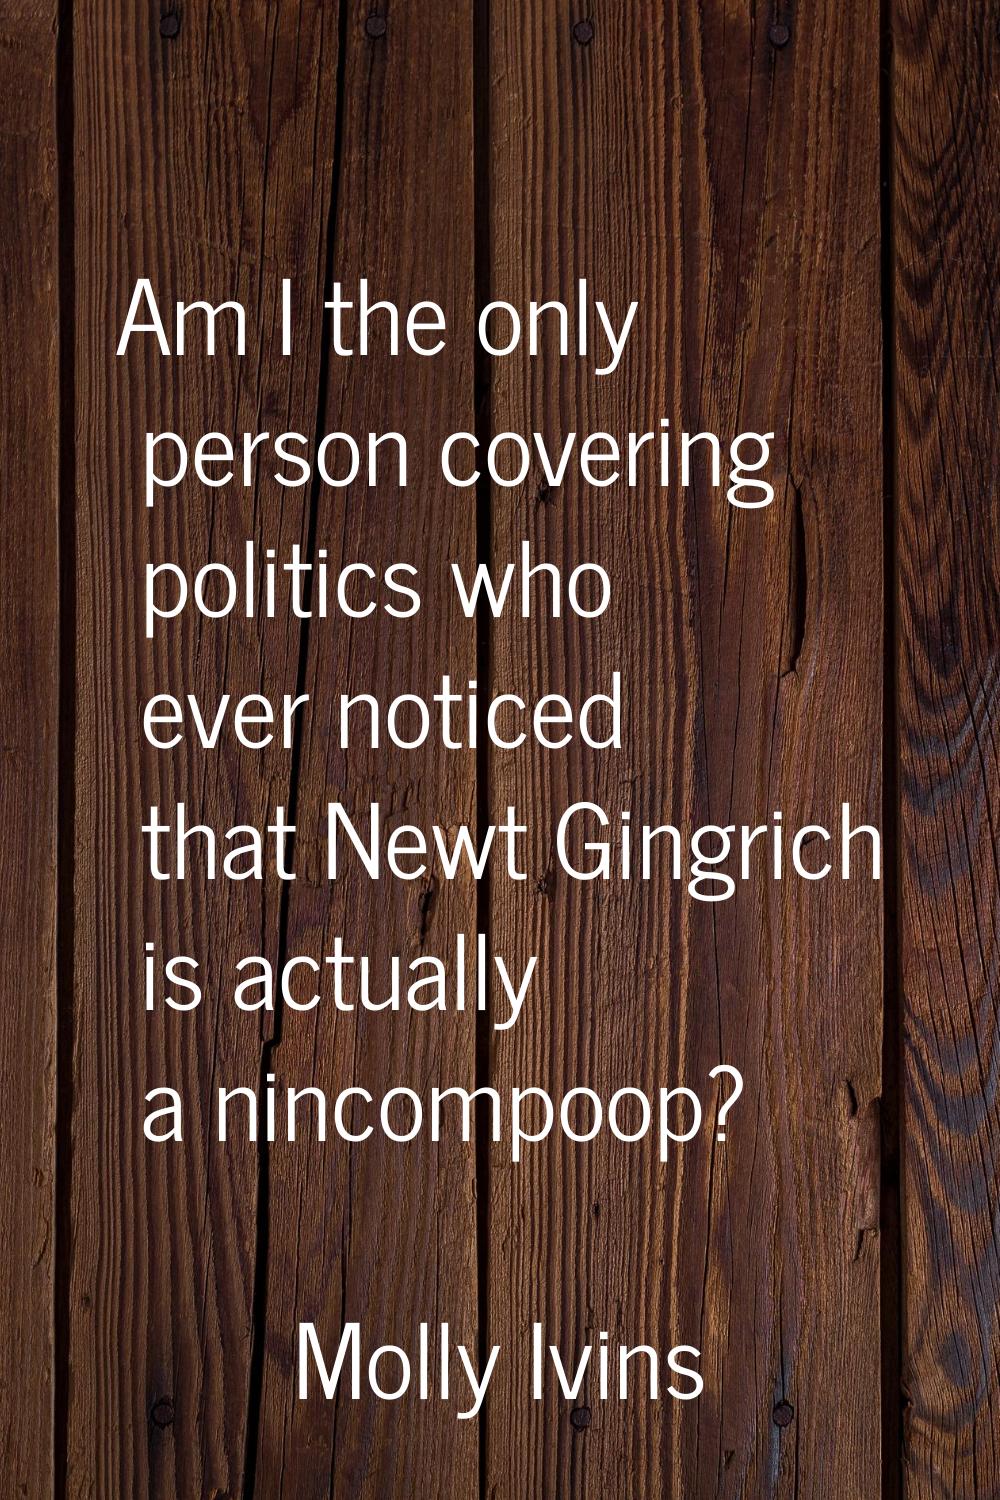 Am I the only person covering politics who ever noticed that Newt Gingrich is actually a nincompoop